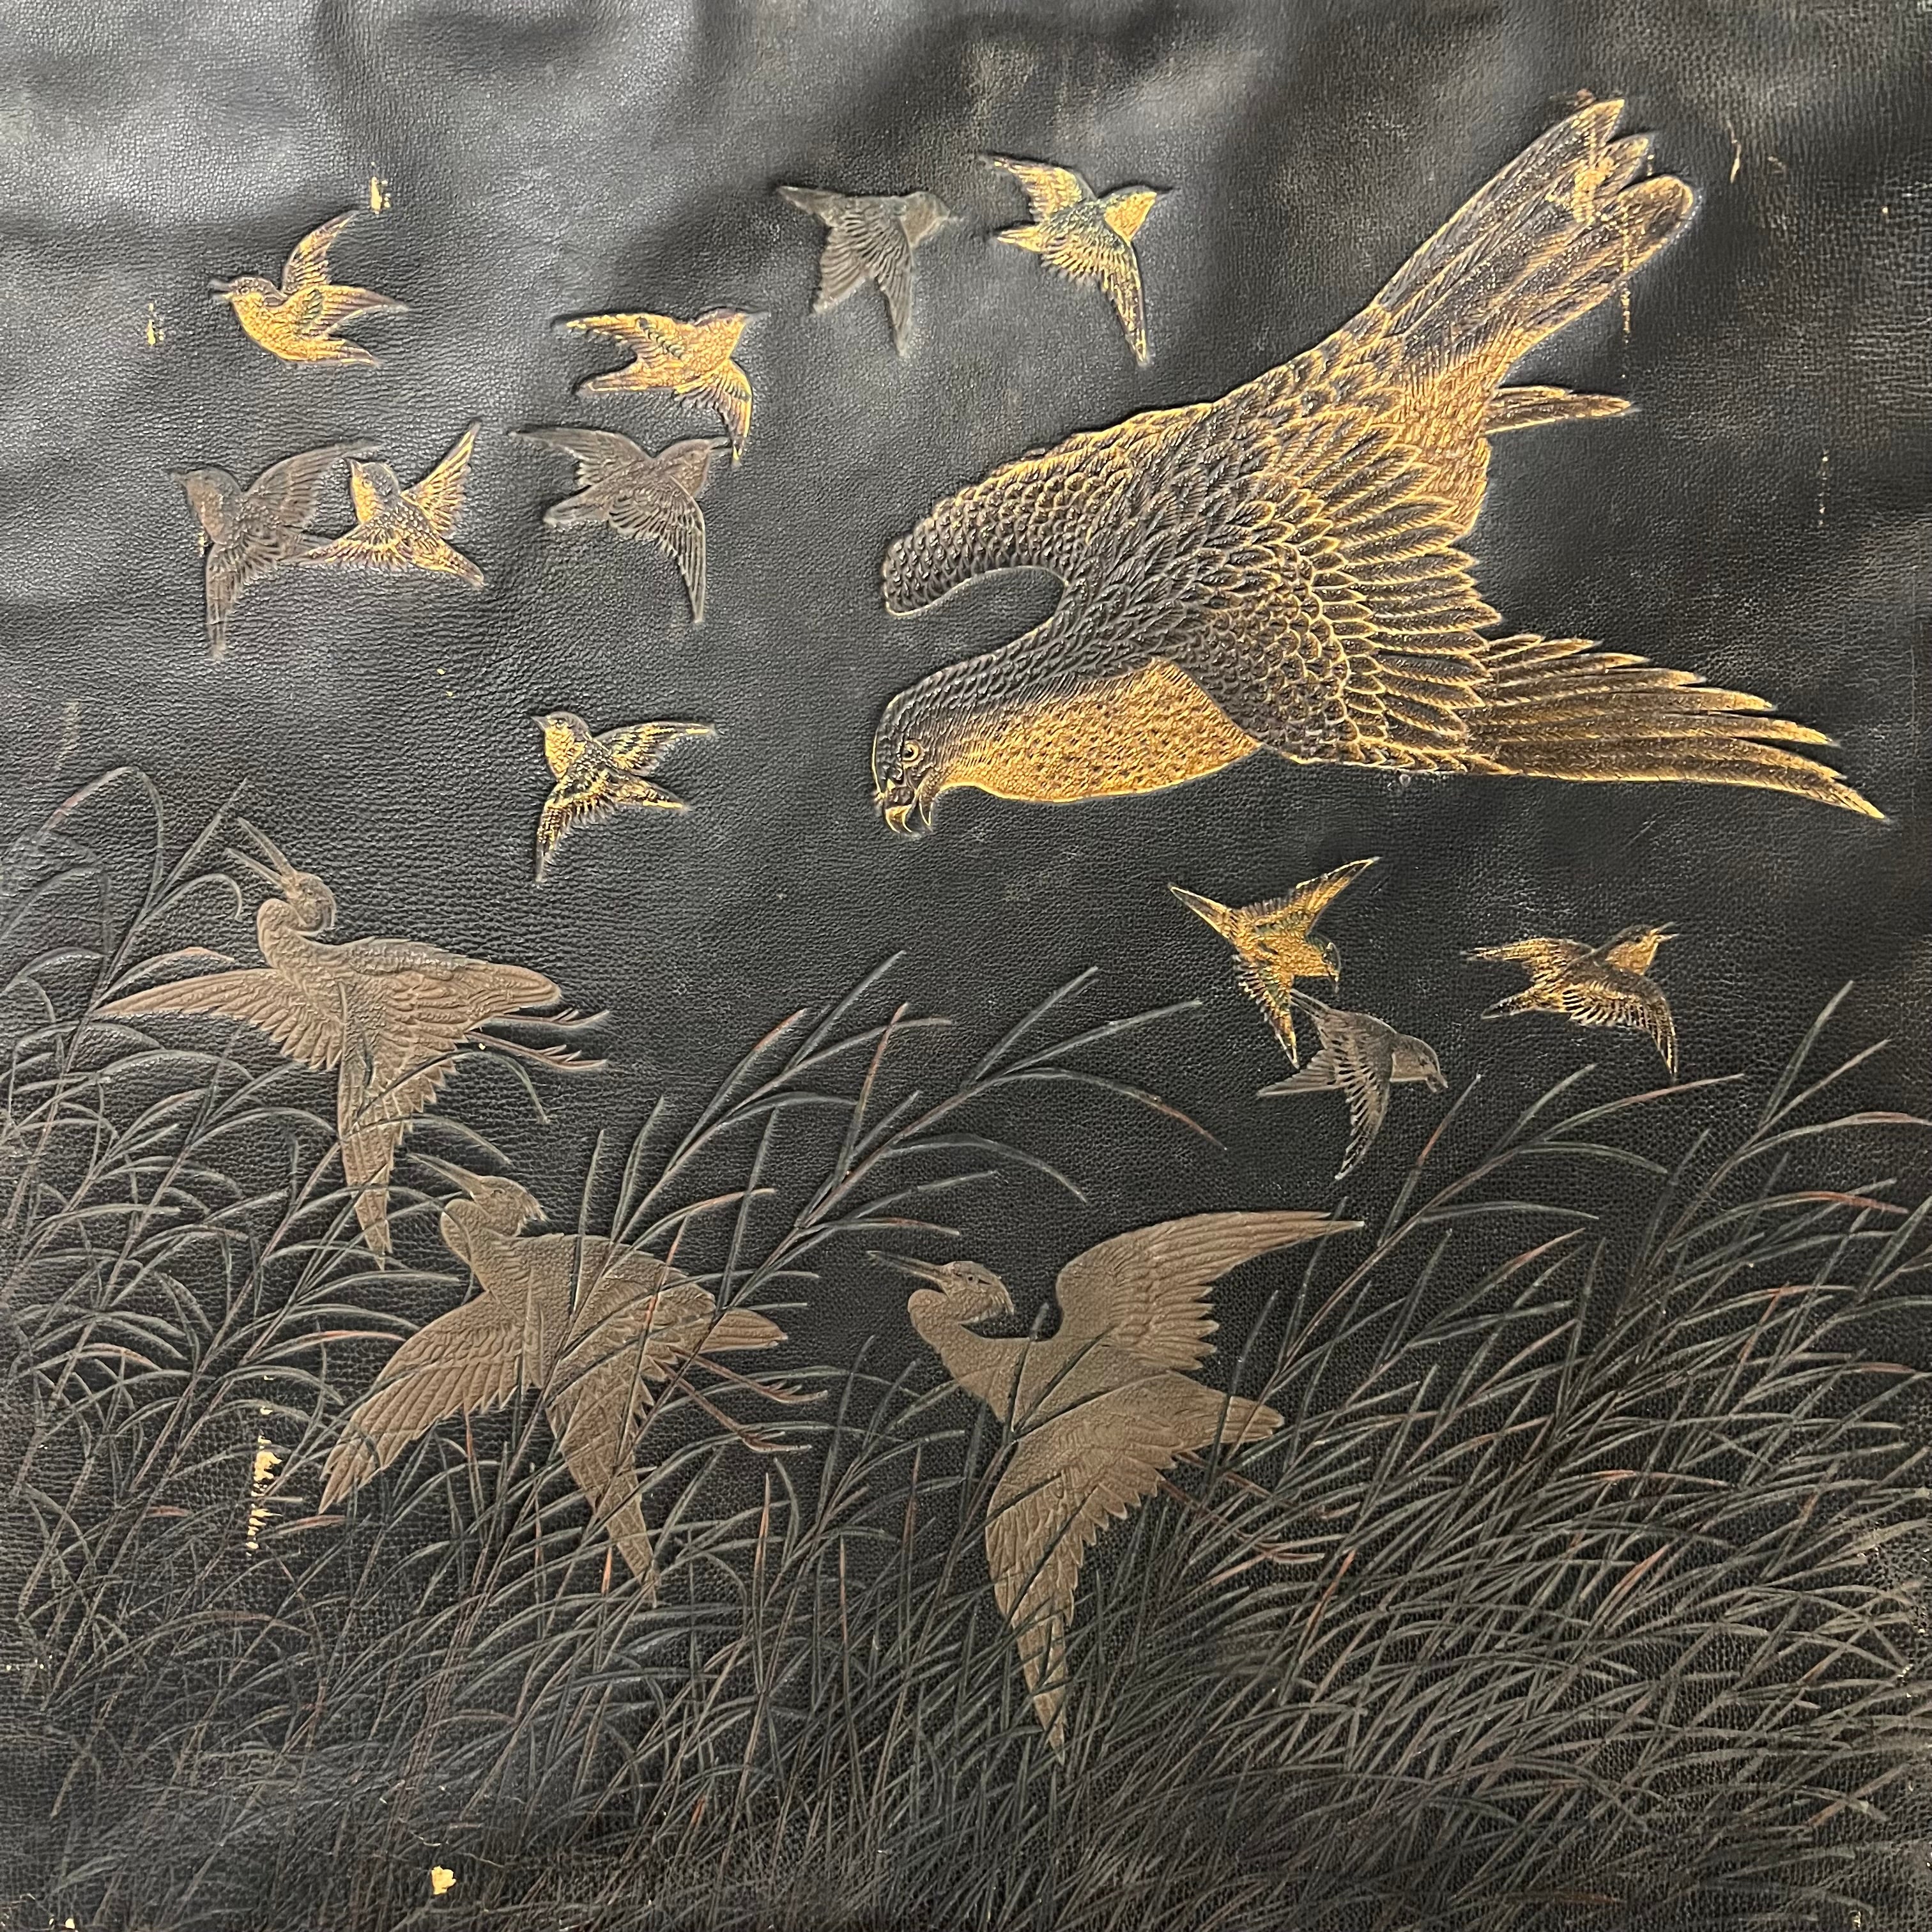 Antique Leather Artwork of Hawk and Birds within Landscape - Industrial Decor - Rare Early 1900s Riveted Gold Design - Mystery Artist